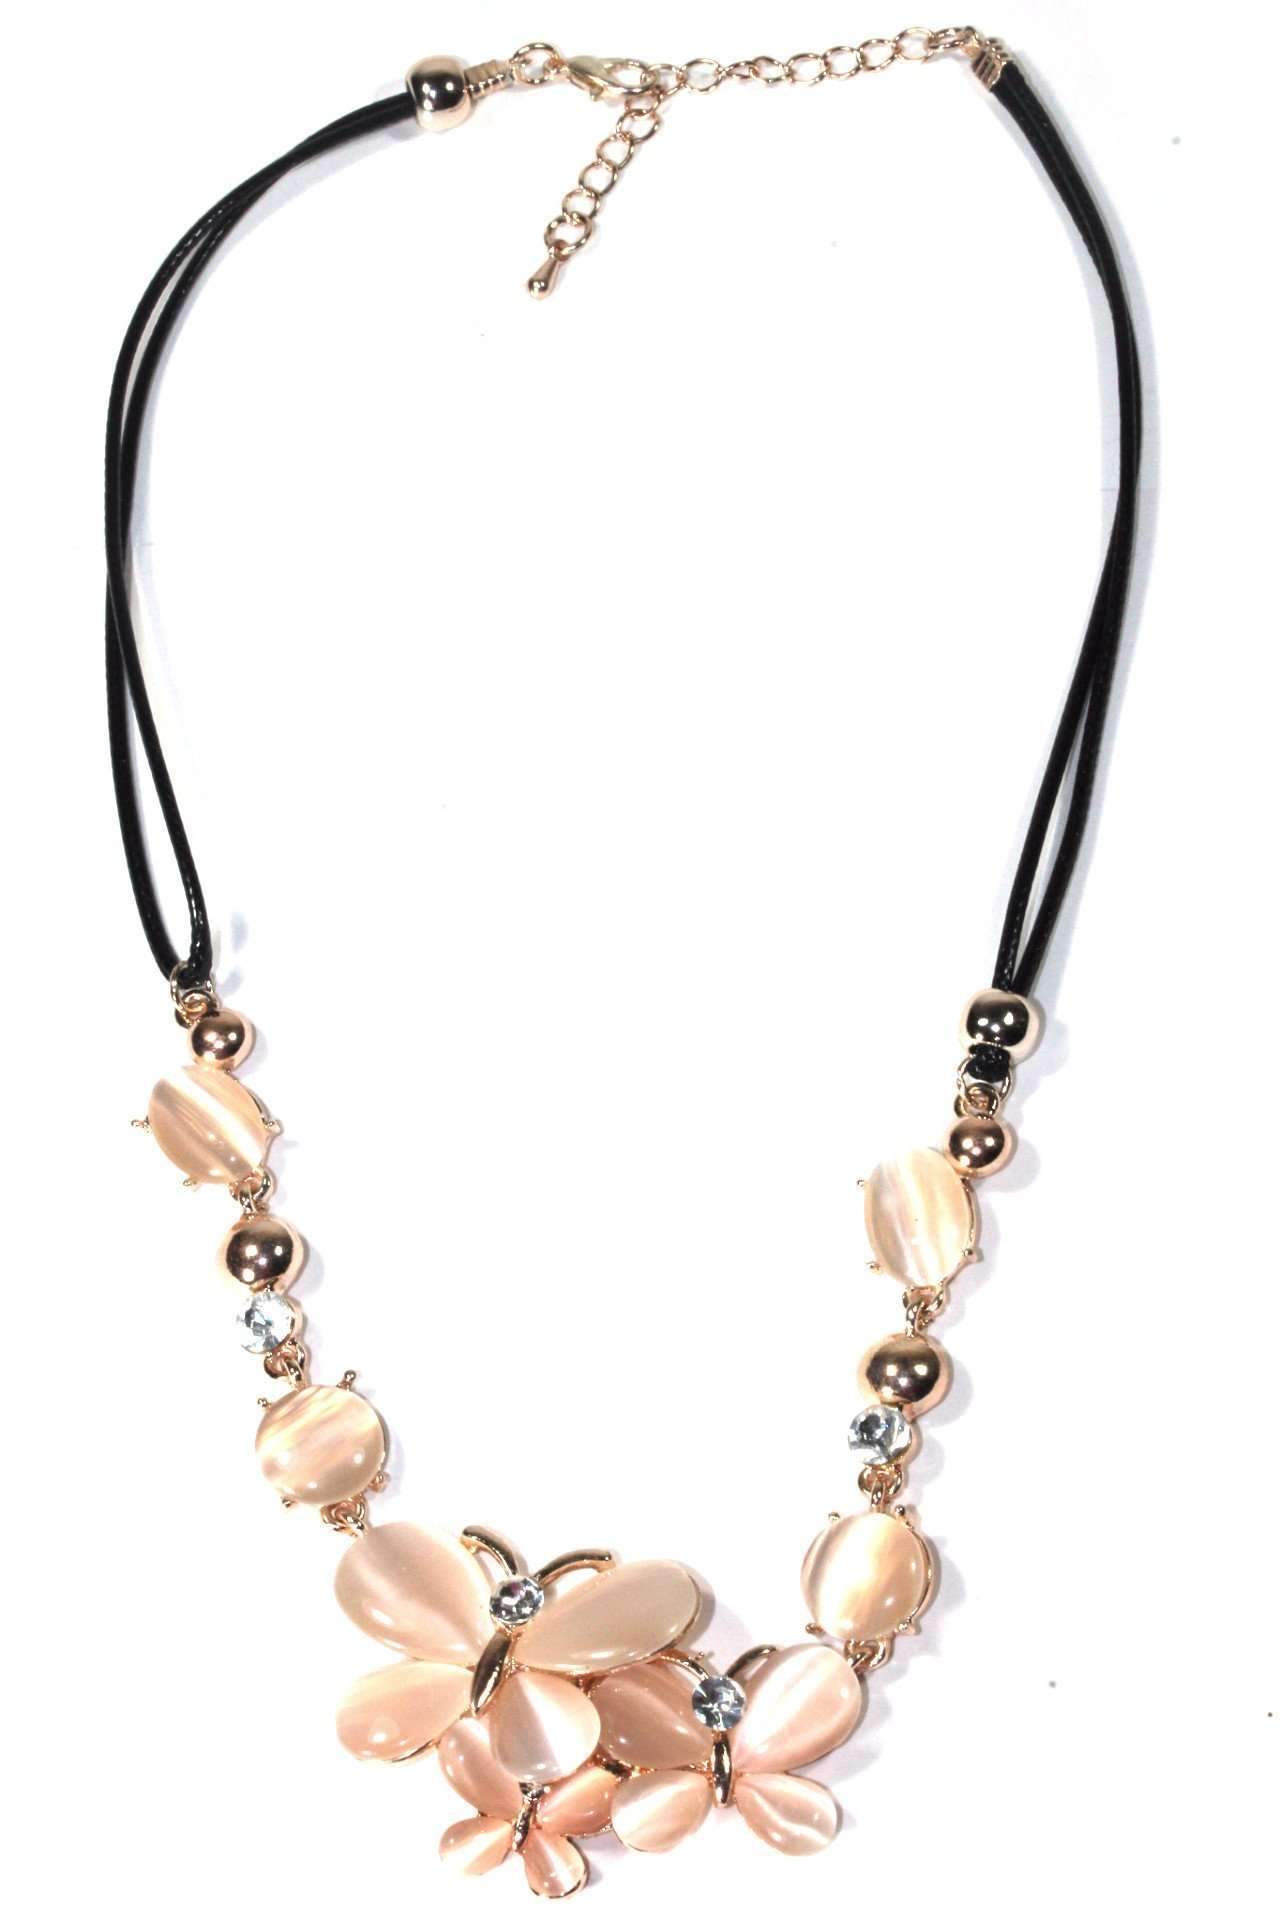 Elegant Butterfly Trio Necklace with a large pink floral pendant and multiple pink beads, strung on a black cord with a silver chain extension.